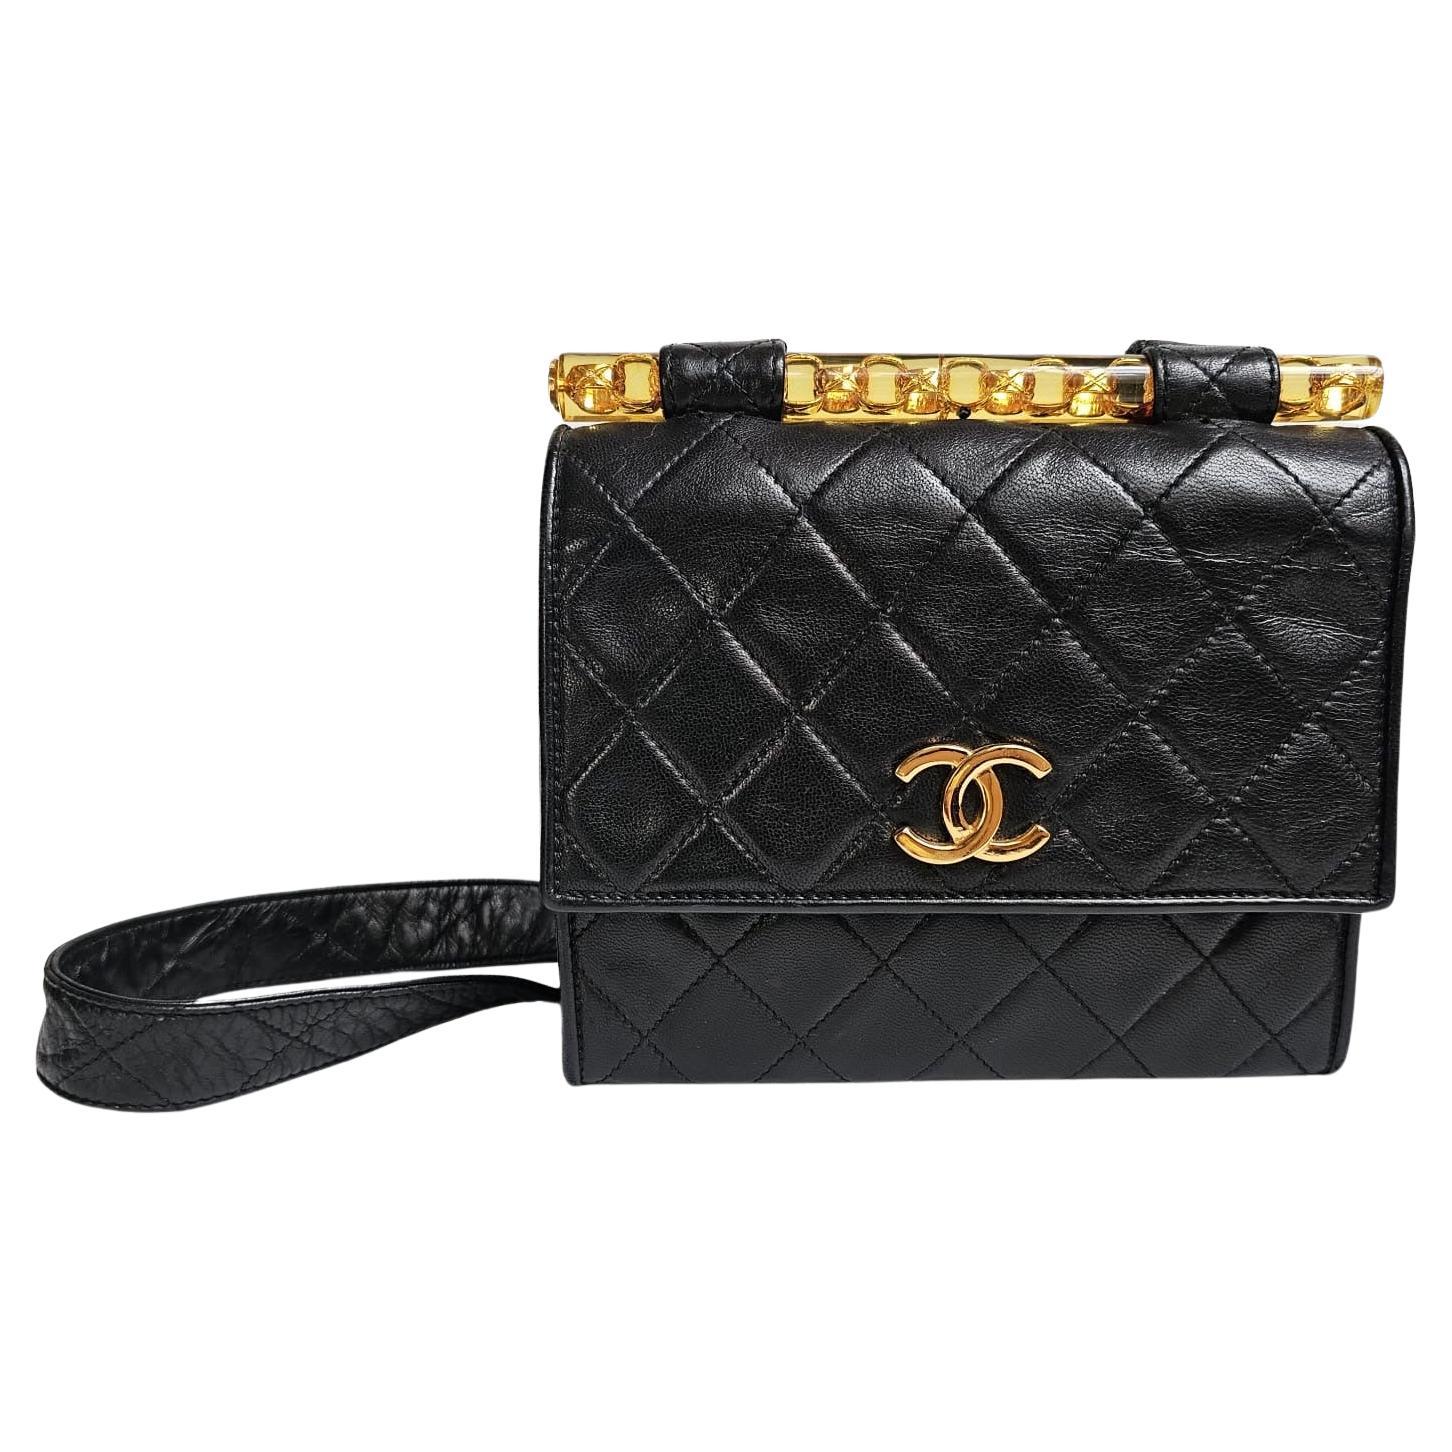 Which Chanel bag is considered the Classic?